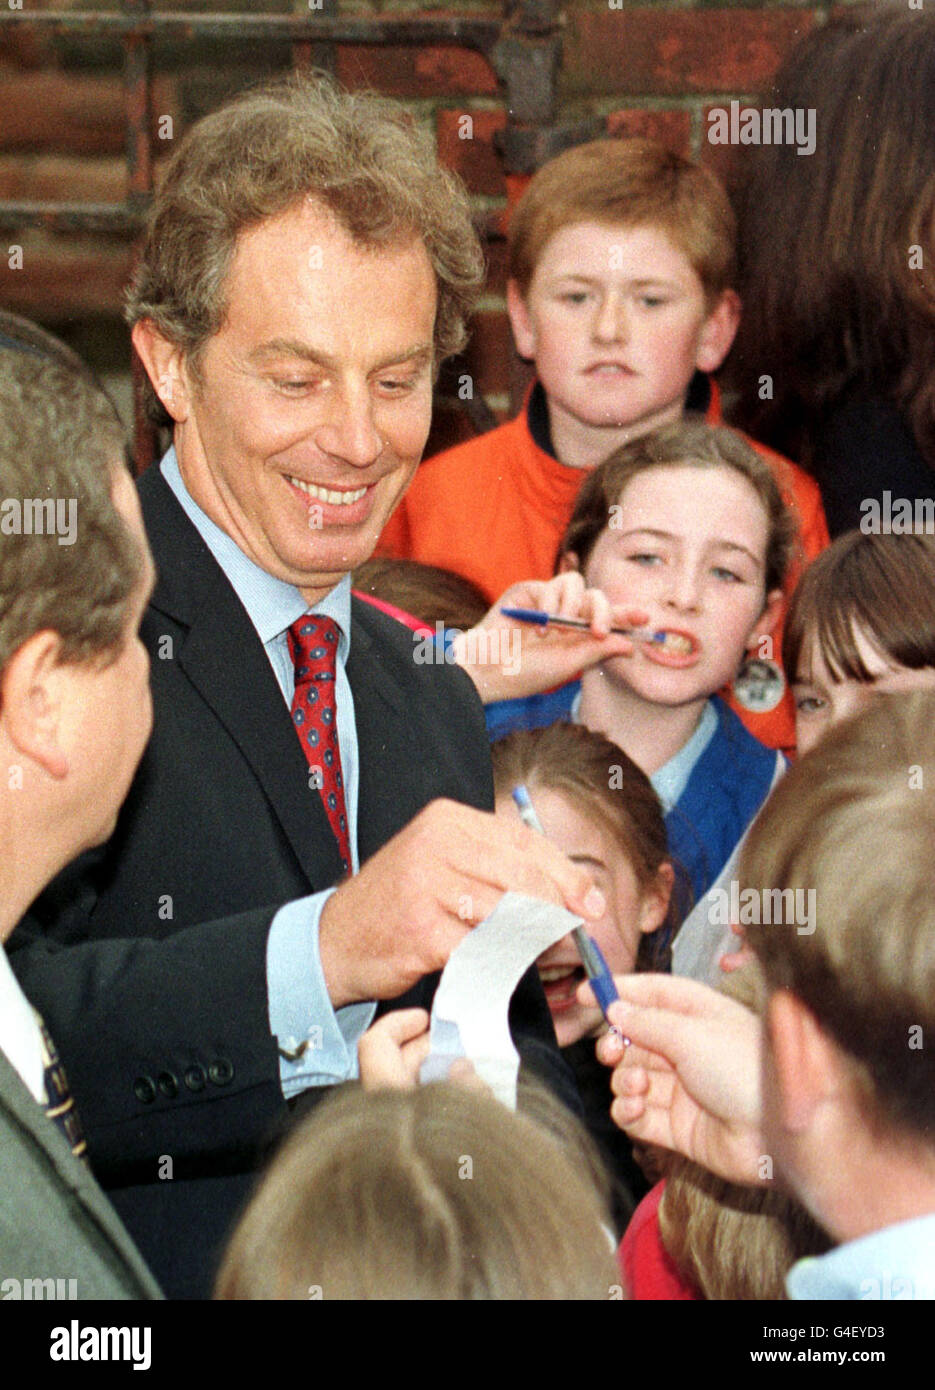 Prime Minister Tony Blair signs autographs for children outside Francis de Sales Church in Walton, Liverpool this afternoon (Friday) where he witnessed the blessing of the marriage between Cherie's father, Tony Booth and Stephenie Buckley. Photo by Dave Kendall/PA. See PA story SOCIAL Booth Stock Photo